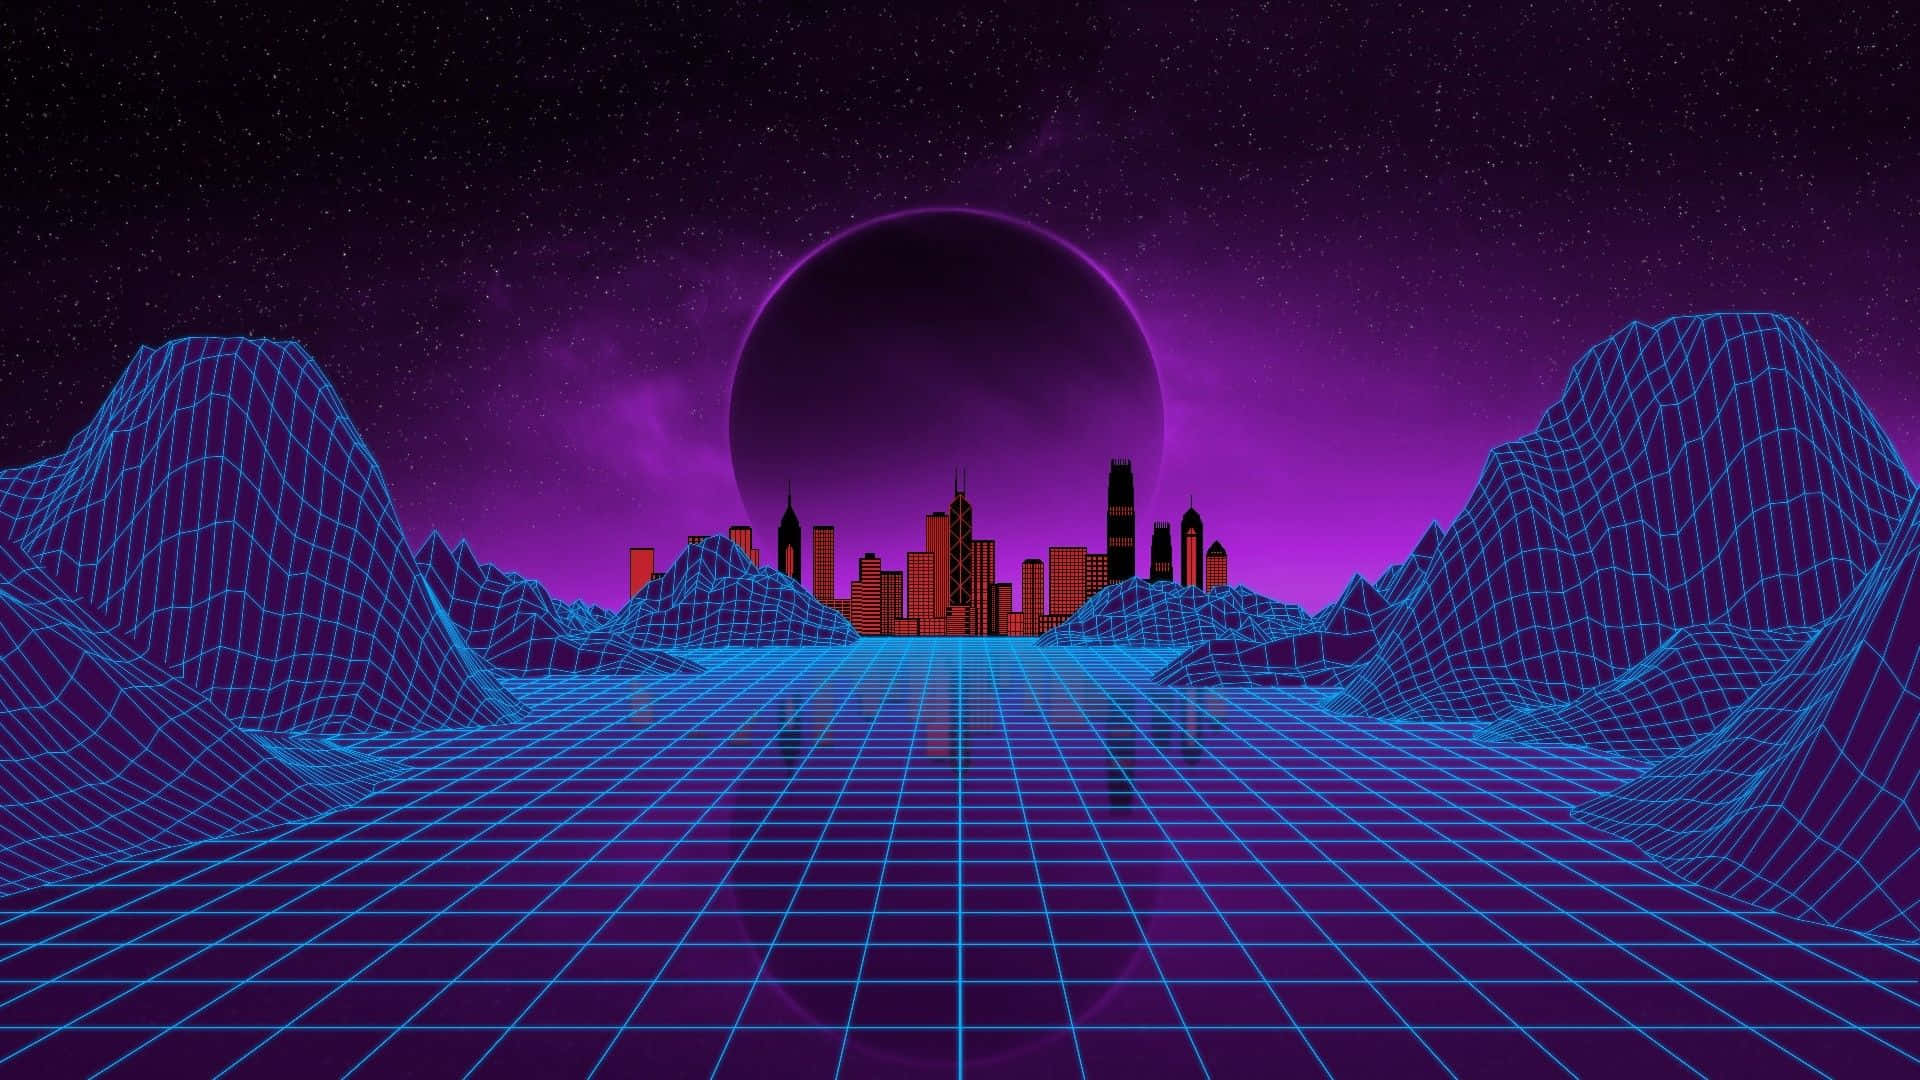 Step back in time in this computer lab with the classic 80s aesthetic. Wallpaper